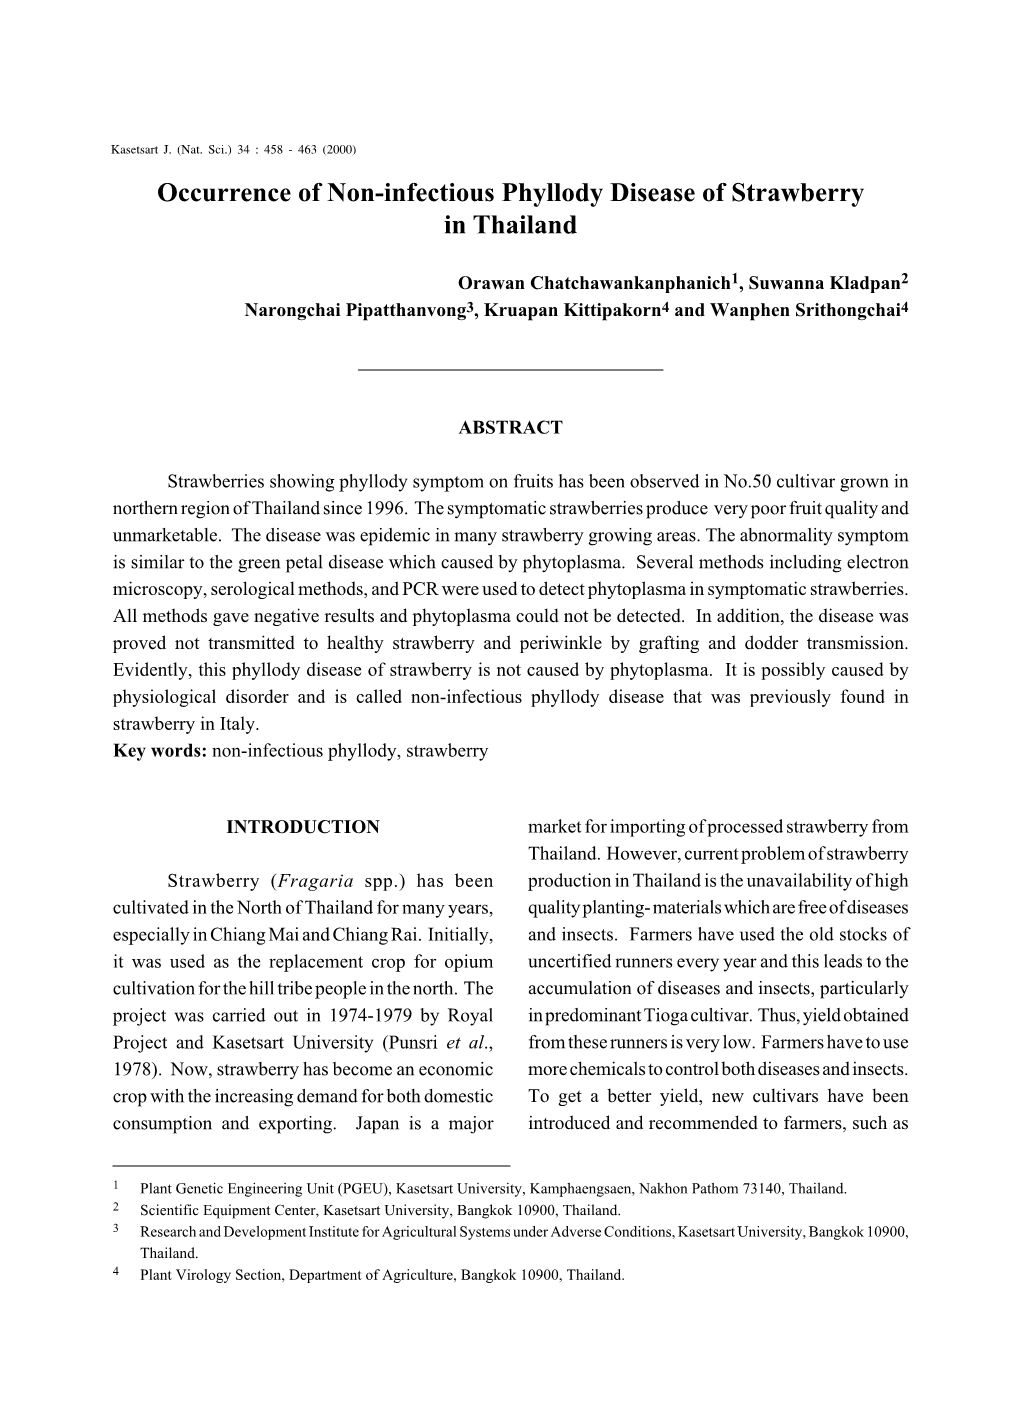 Occurrence of Non-Infectious Phyllody Disease of Strawberry in Thailand